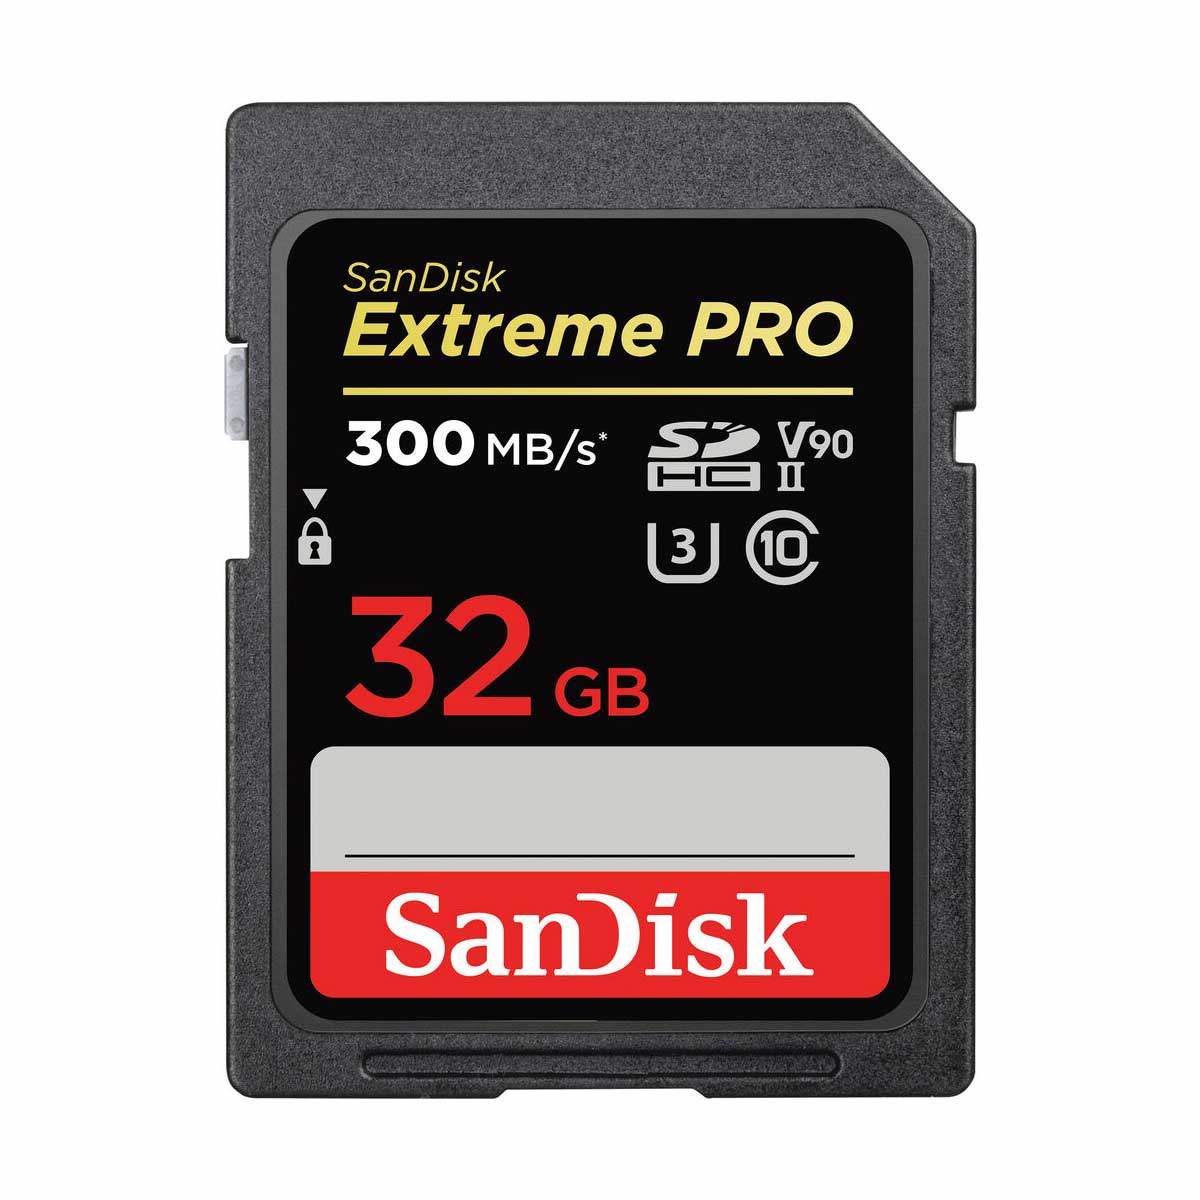 SanDisk 32GB Extreme PRO UHS-II SDHC Memory Card 300 MB/s